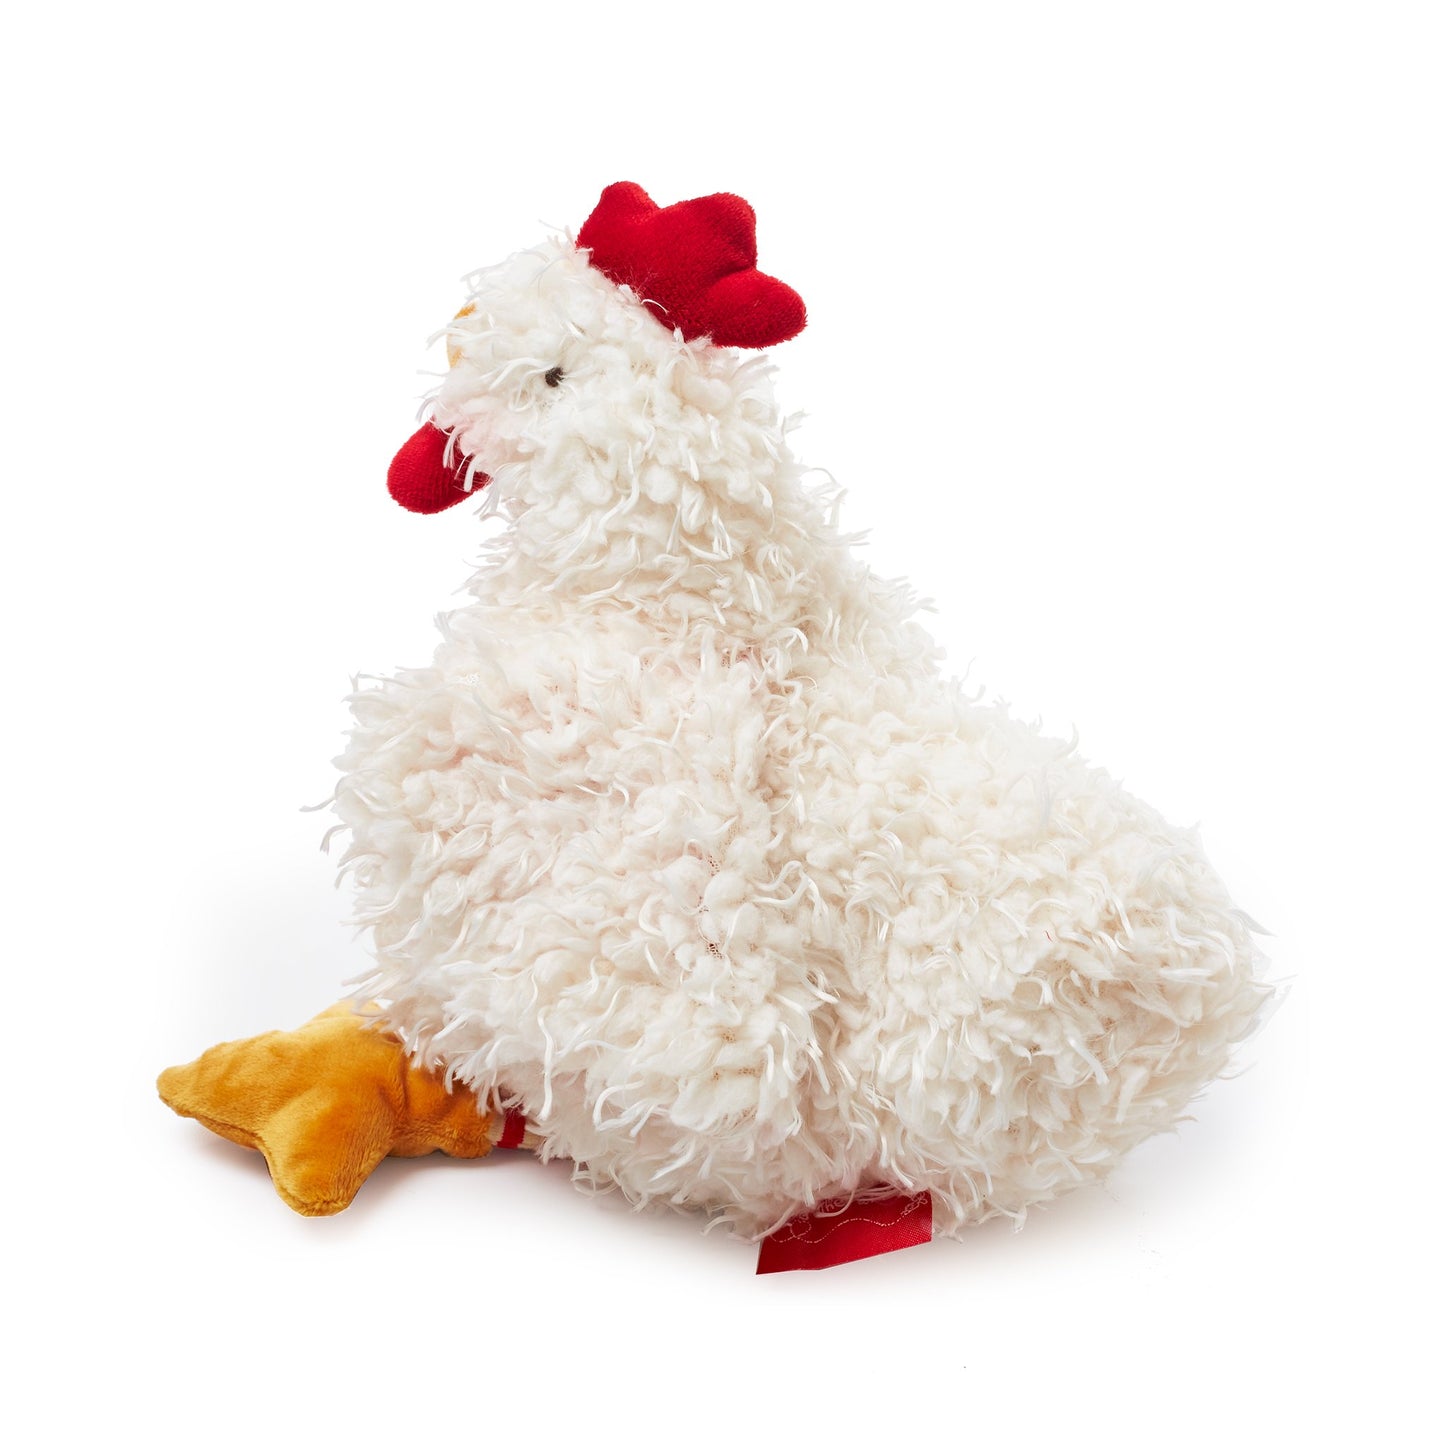 Clucky the Chicken 12" Plush